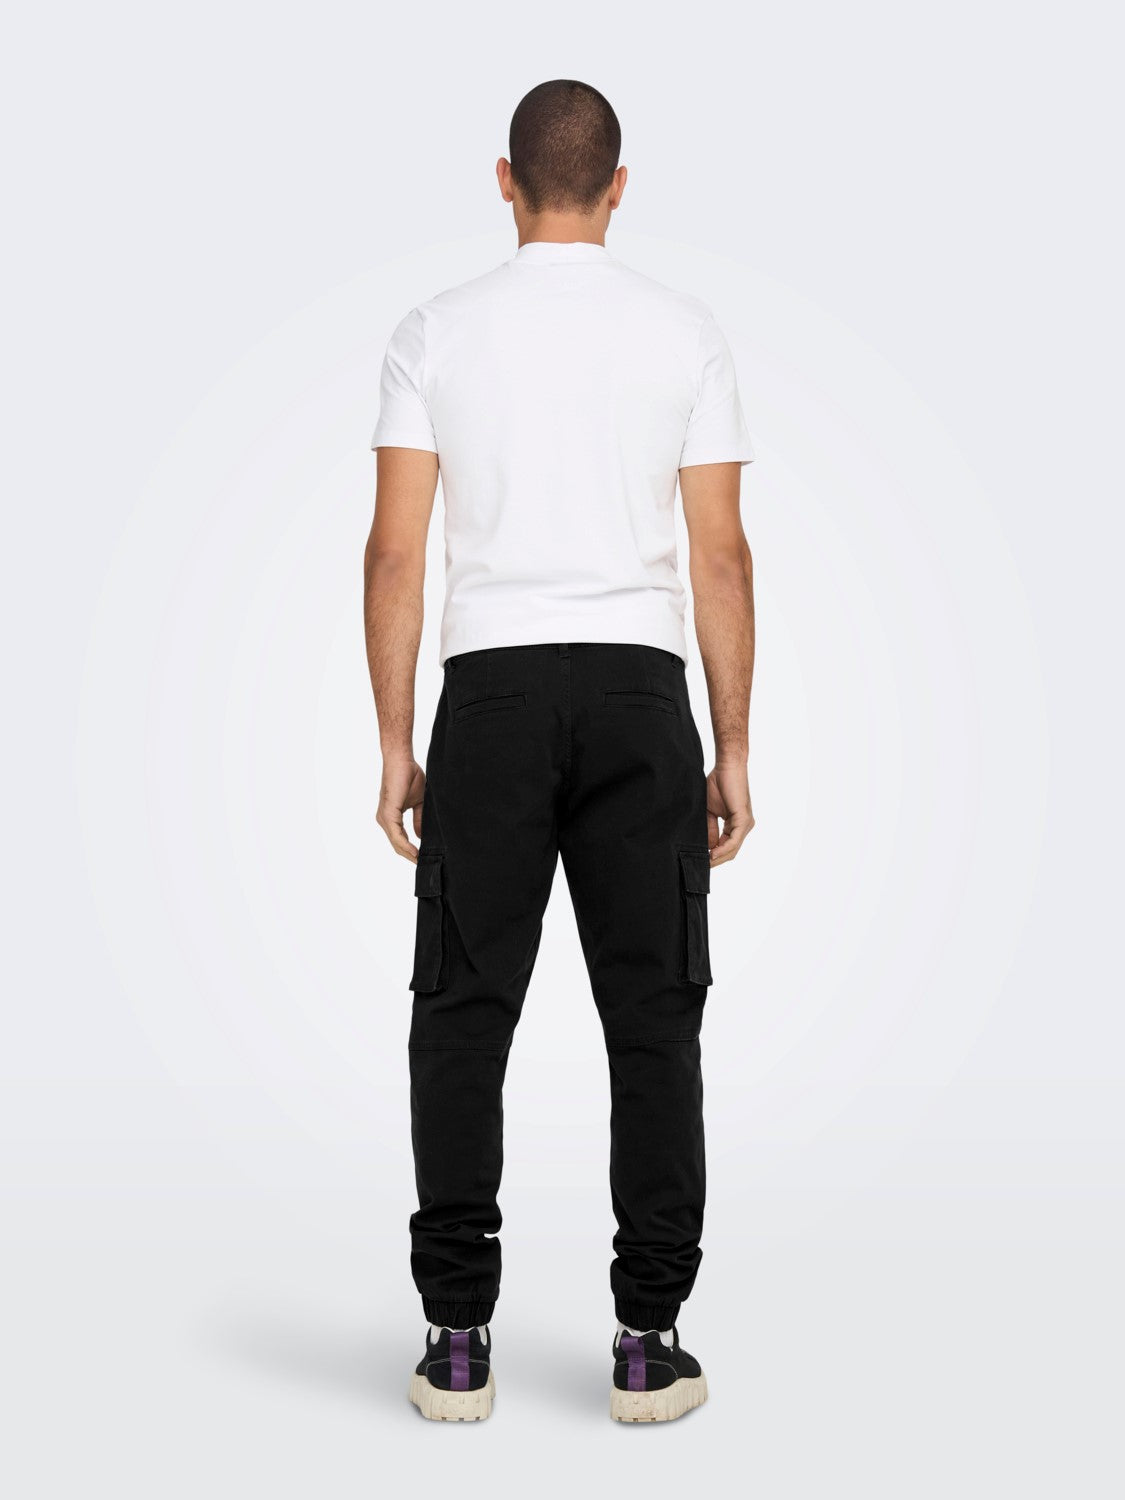 ONLY & SONS Cargo Pants in BLACK